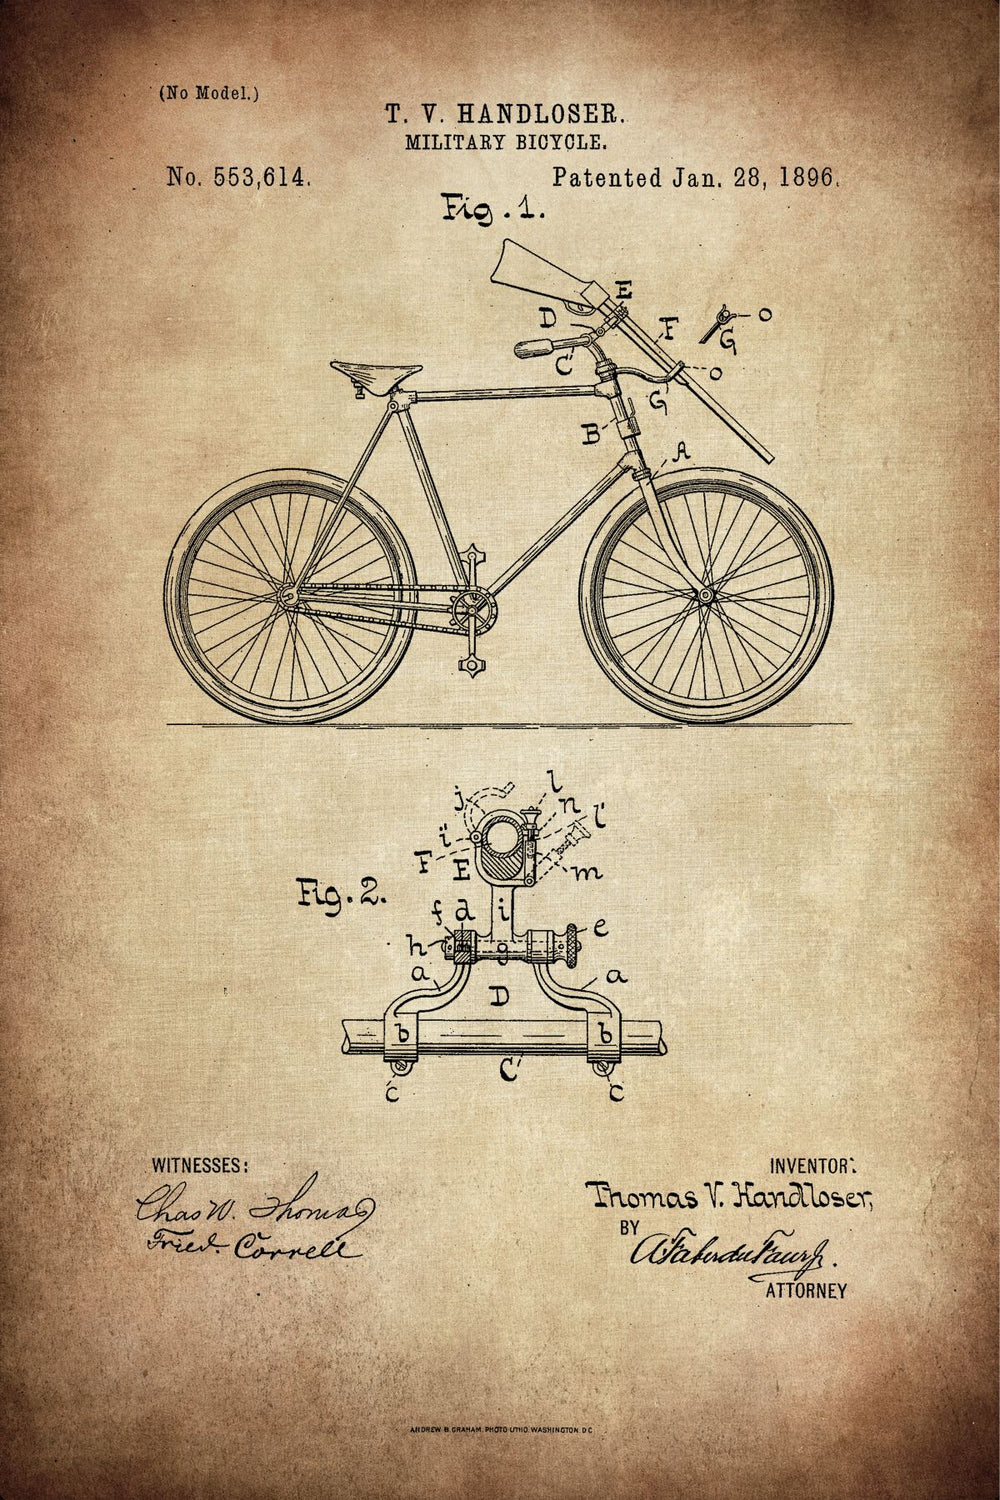 Military Bicycle Patent